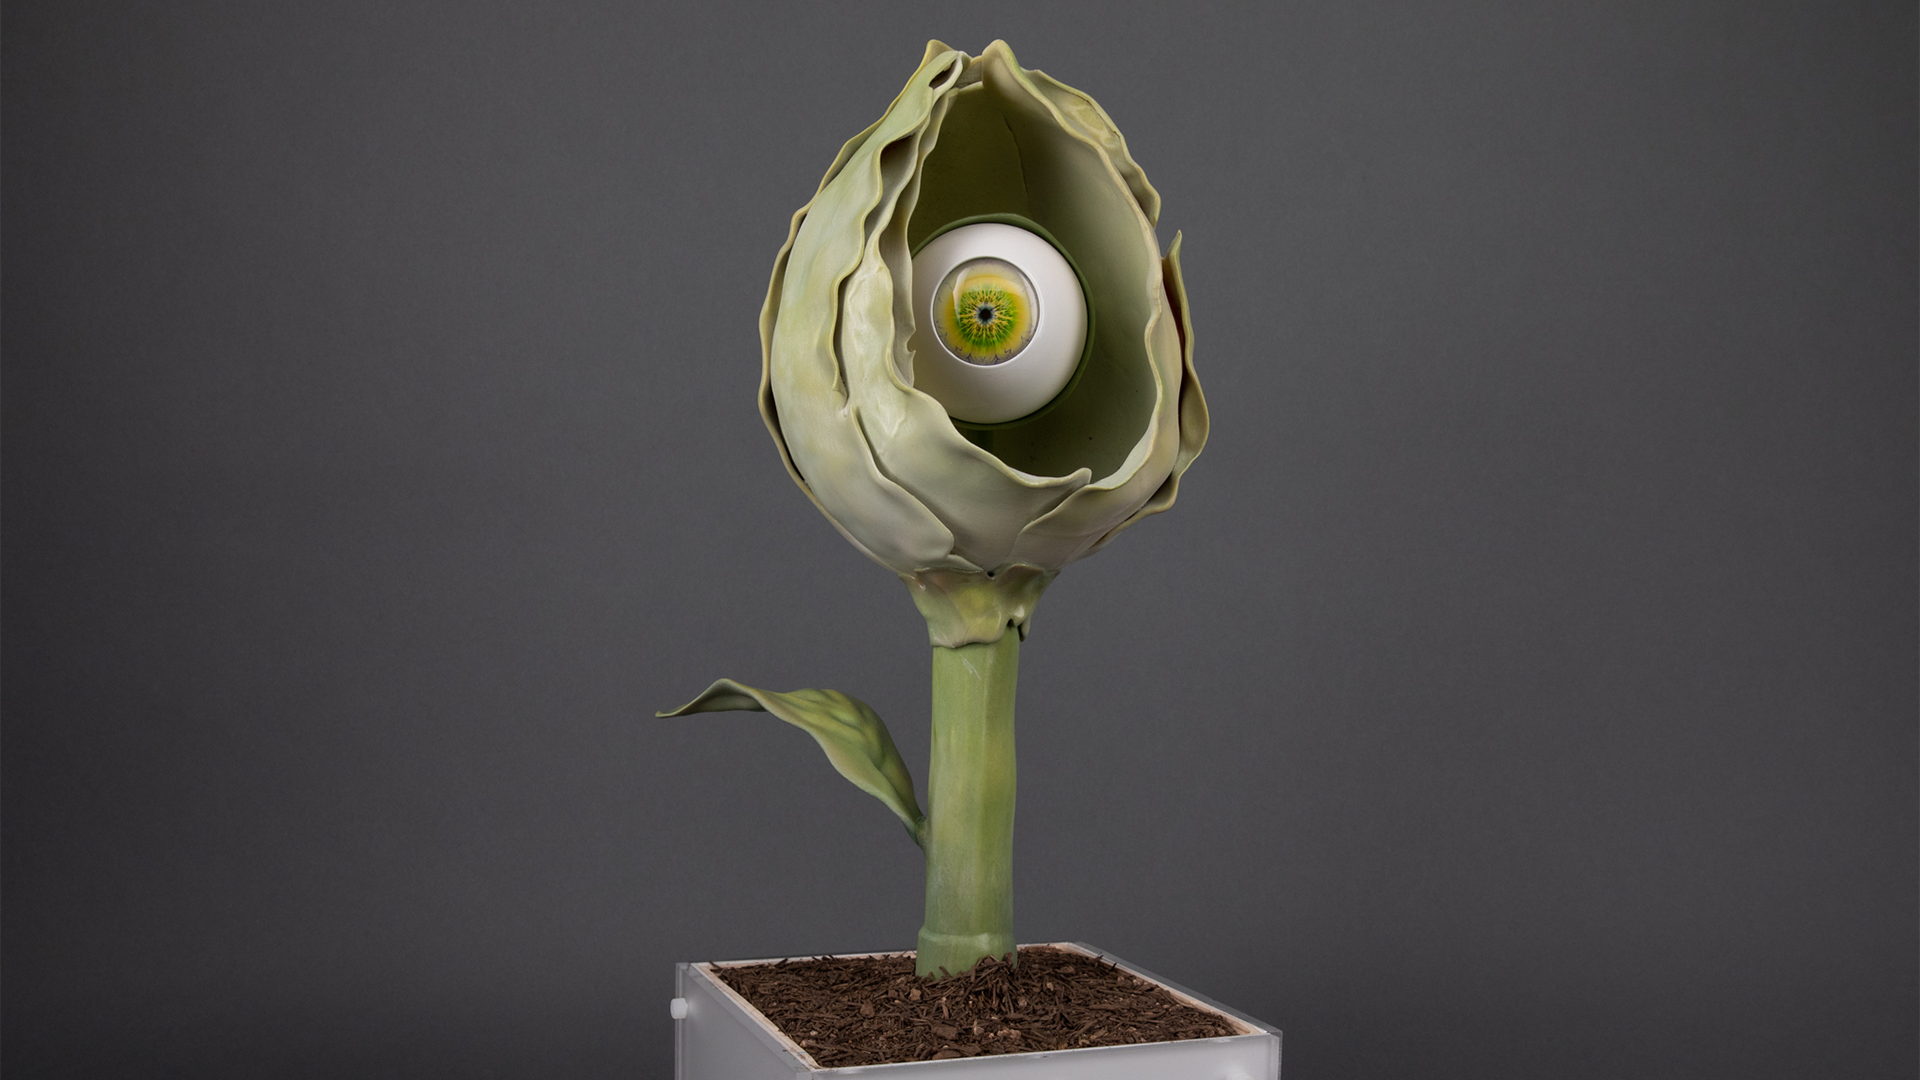 A fictional plant with a flower bud top and a big eyeball, representing an introverted person